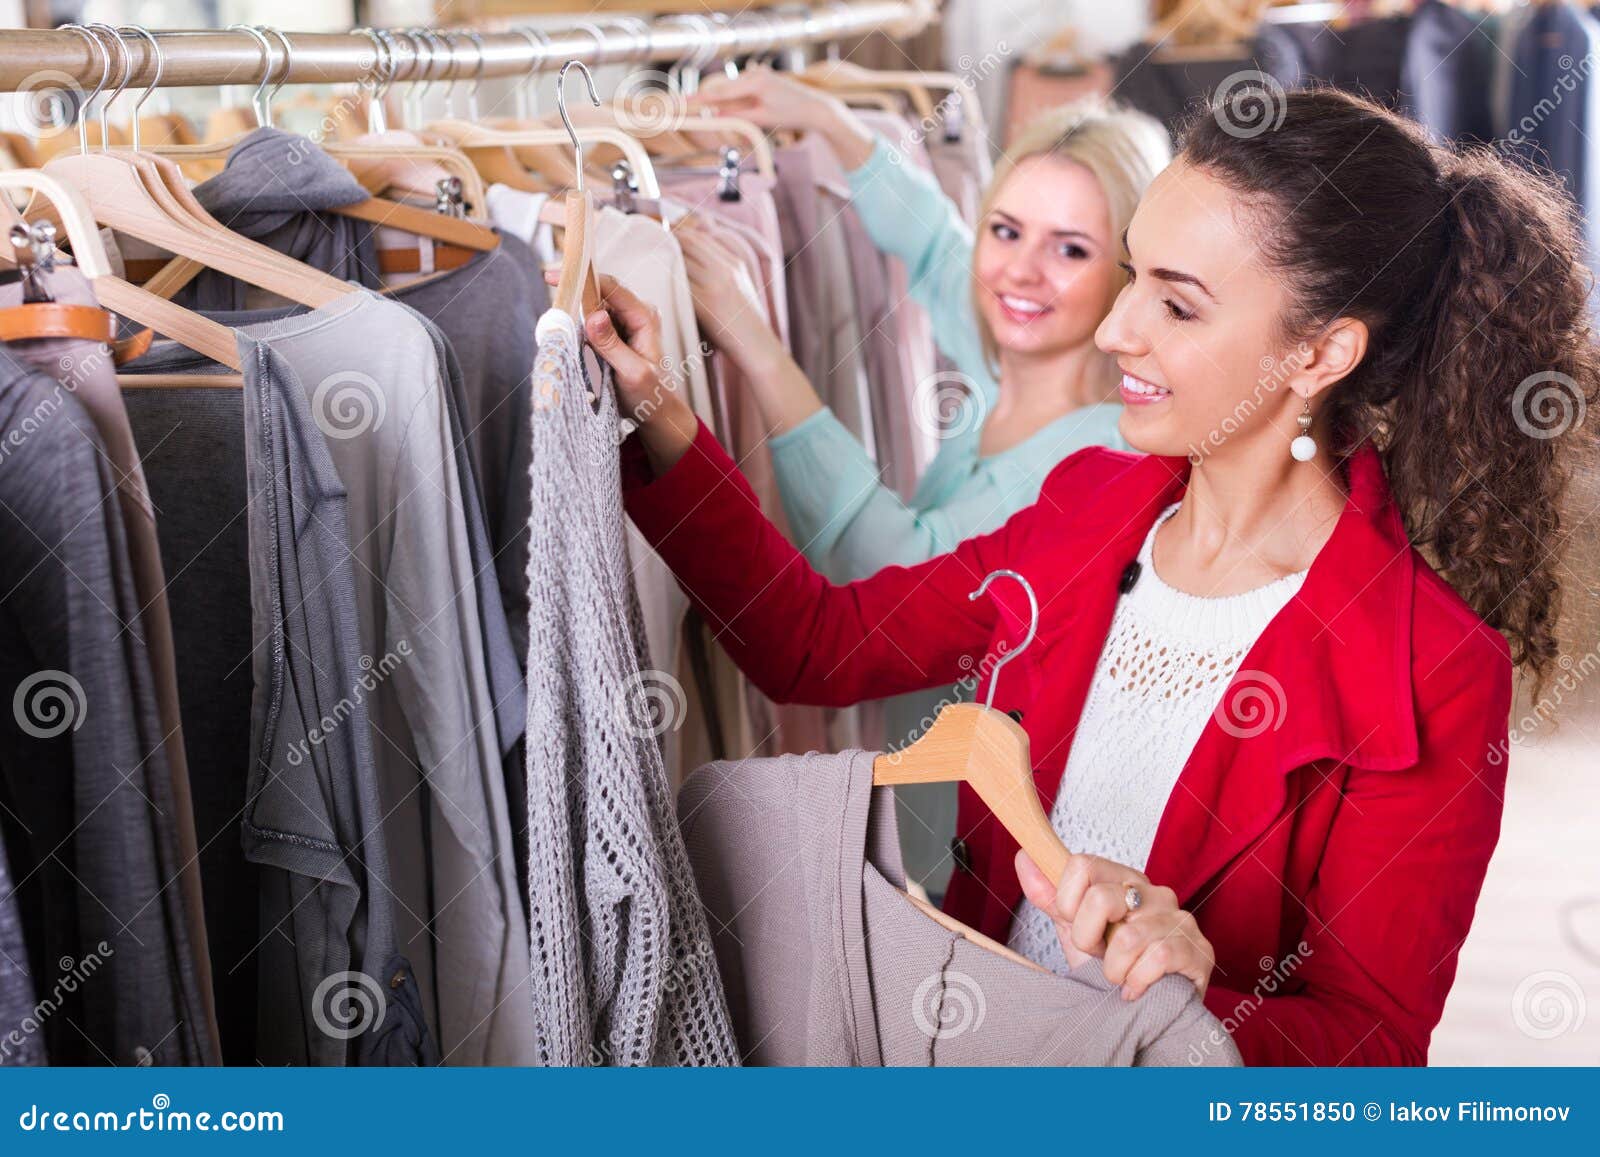 Young Women at the Apparel Store Stock Photo - Image of jersey ...